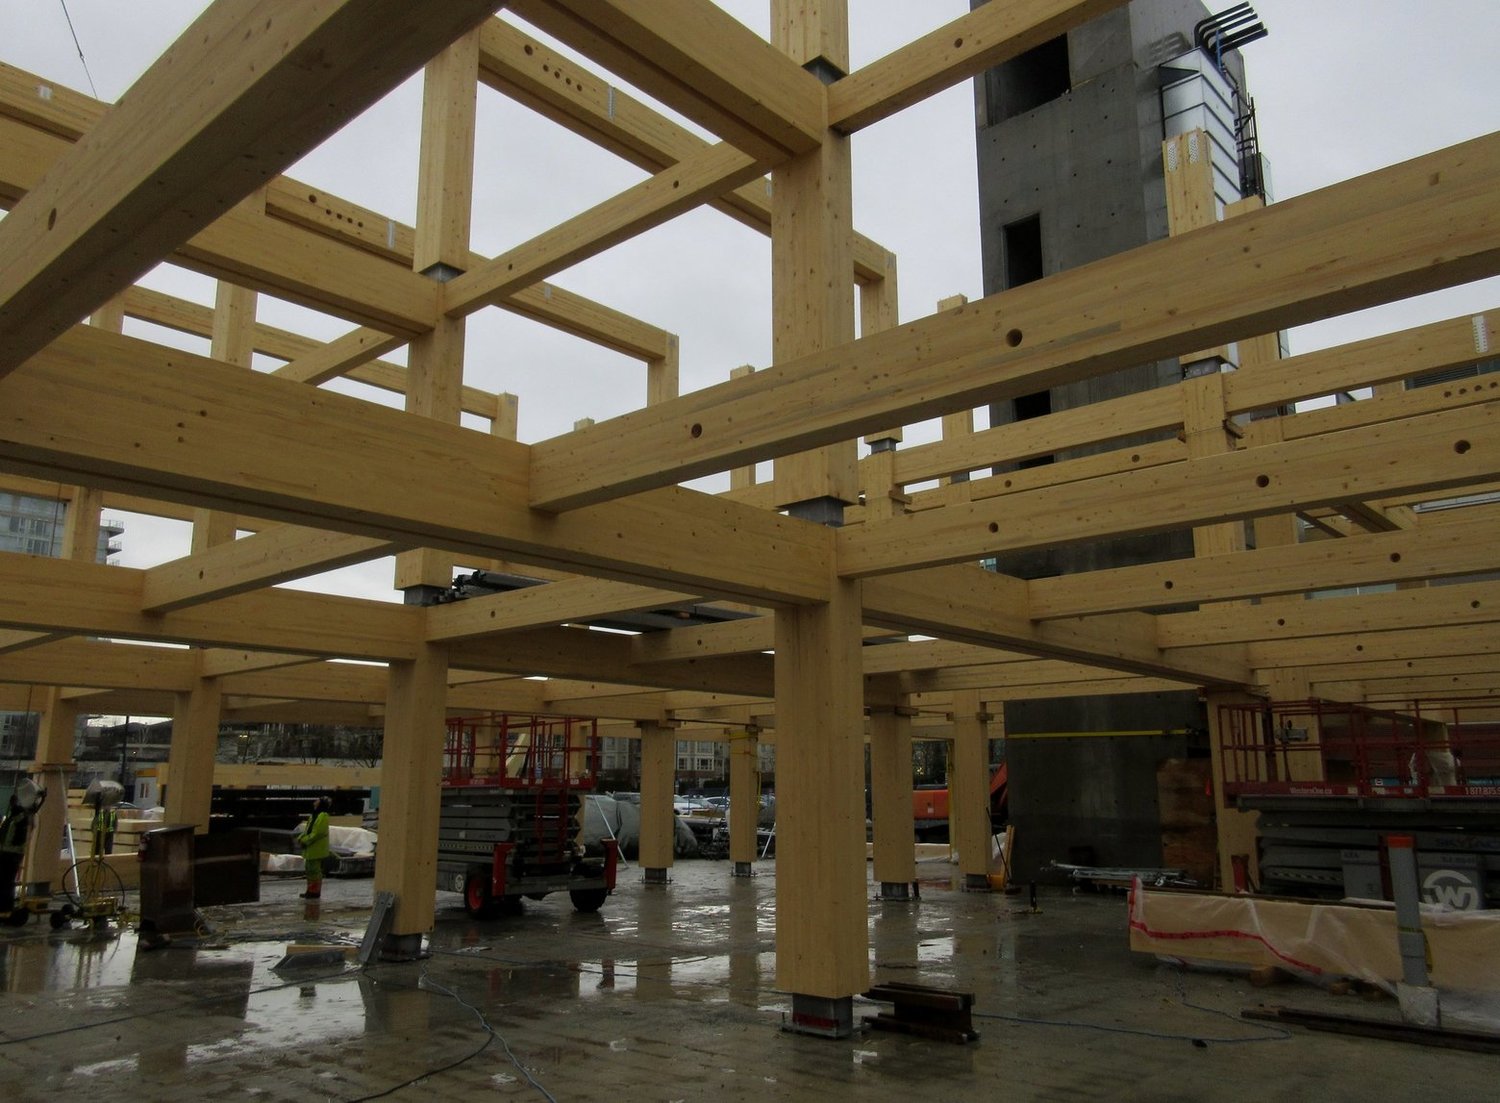 The four-story Wilson School of Design in Richmond, B.C., under construction last year with glue-laminated post-and-beam framing. Later, cross-laminated timber decking was added. The building was designed by the Seattle architecture firm Fast+Epp.